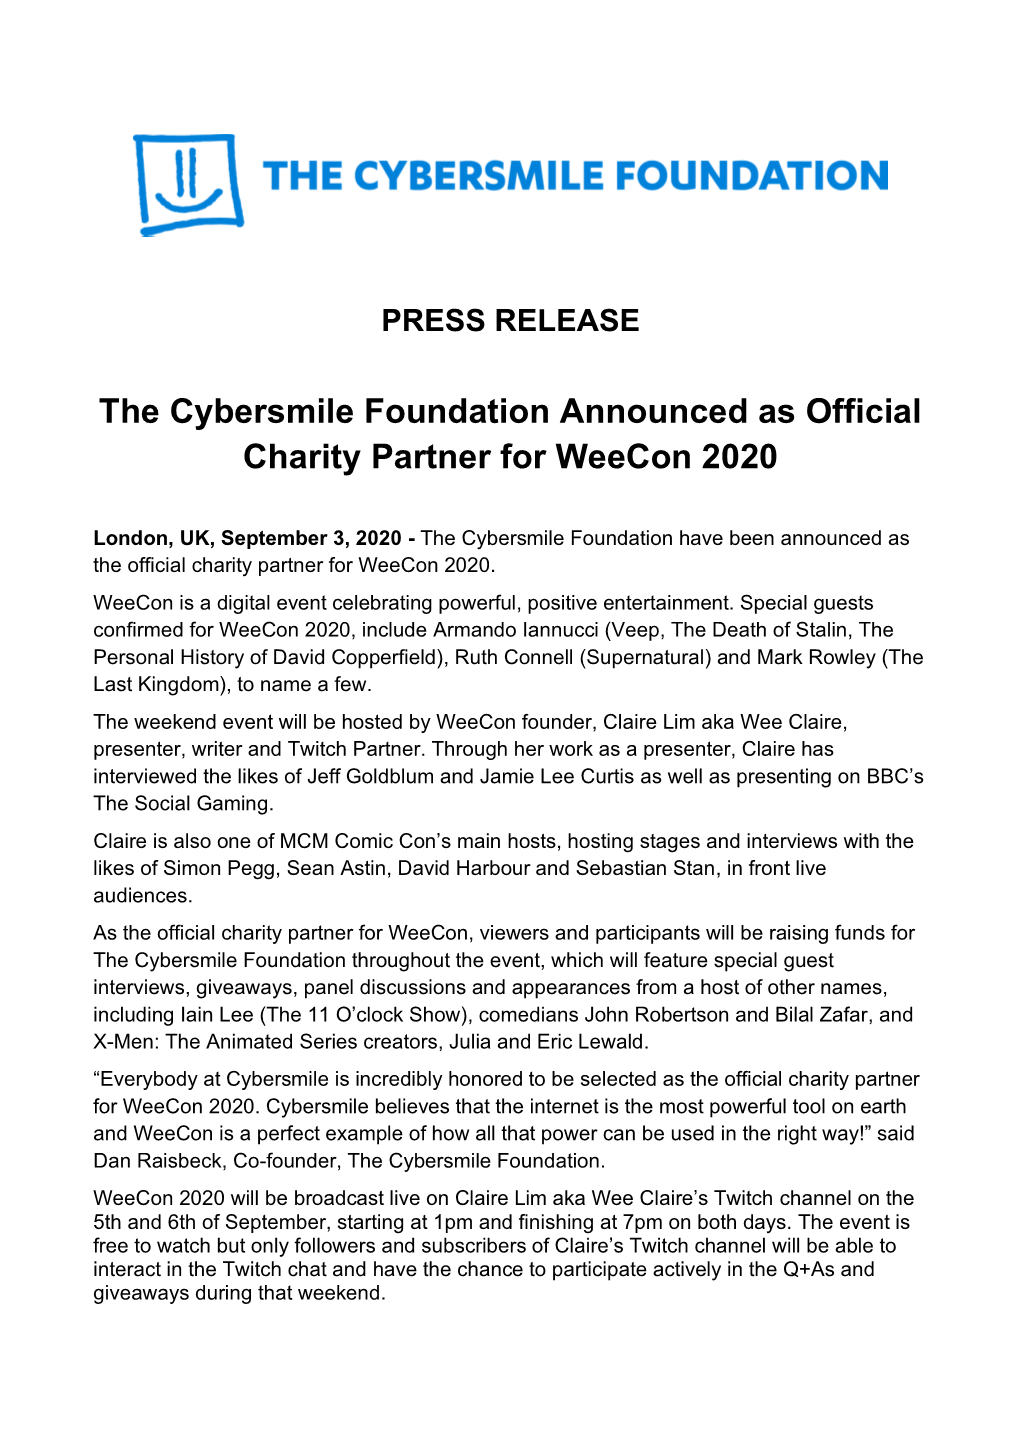 The Cybersmile Foundation Announced As Official Charity Partner for Weecon 2020